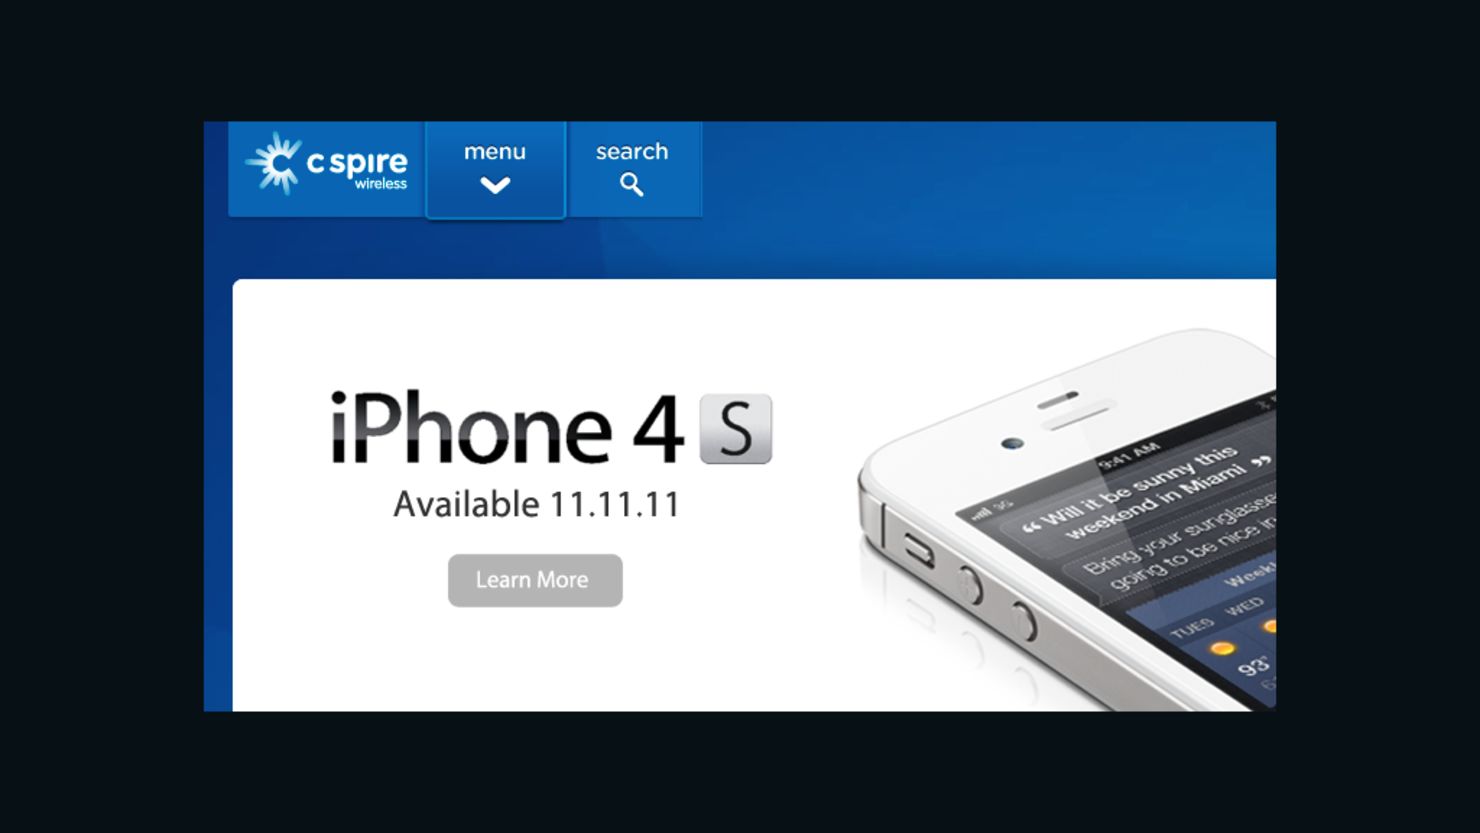 Sign In to Your C Spire Account